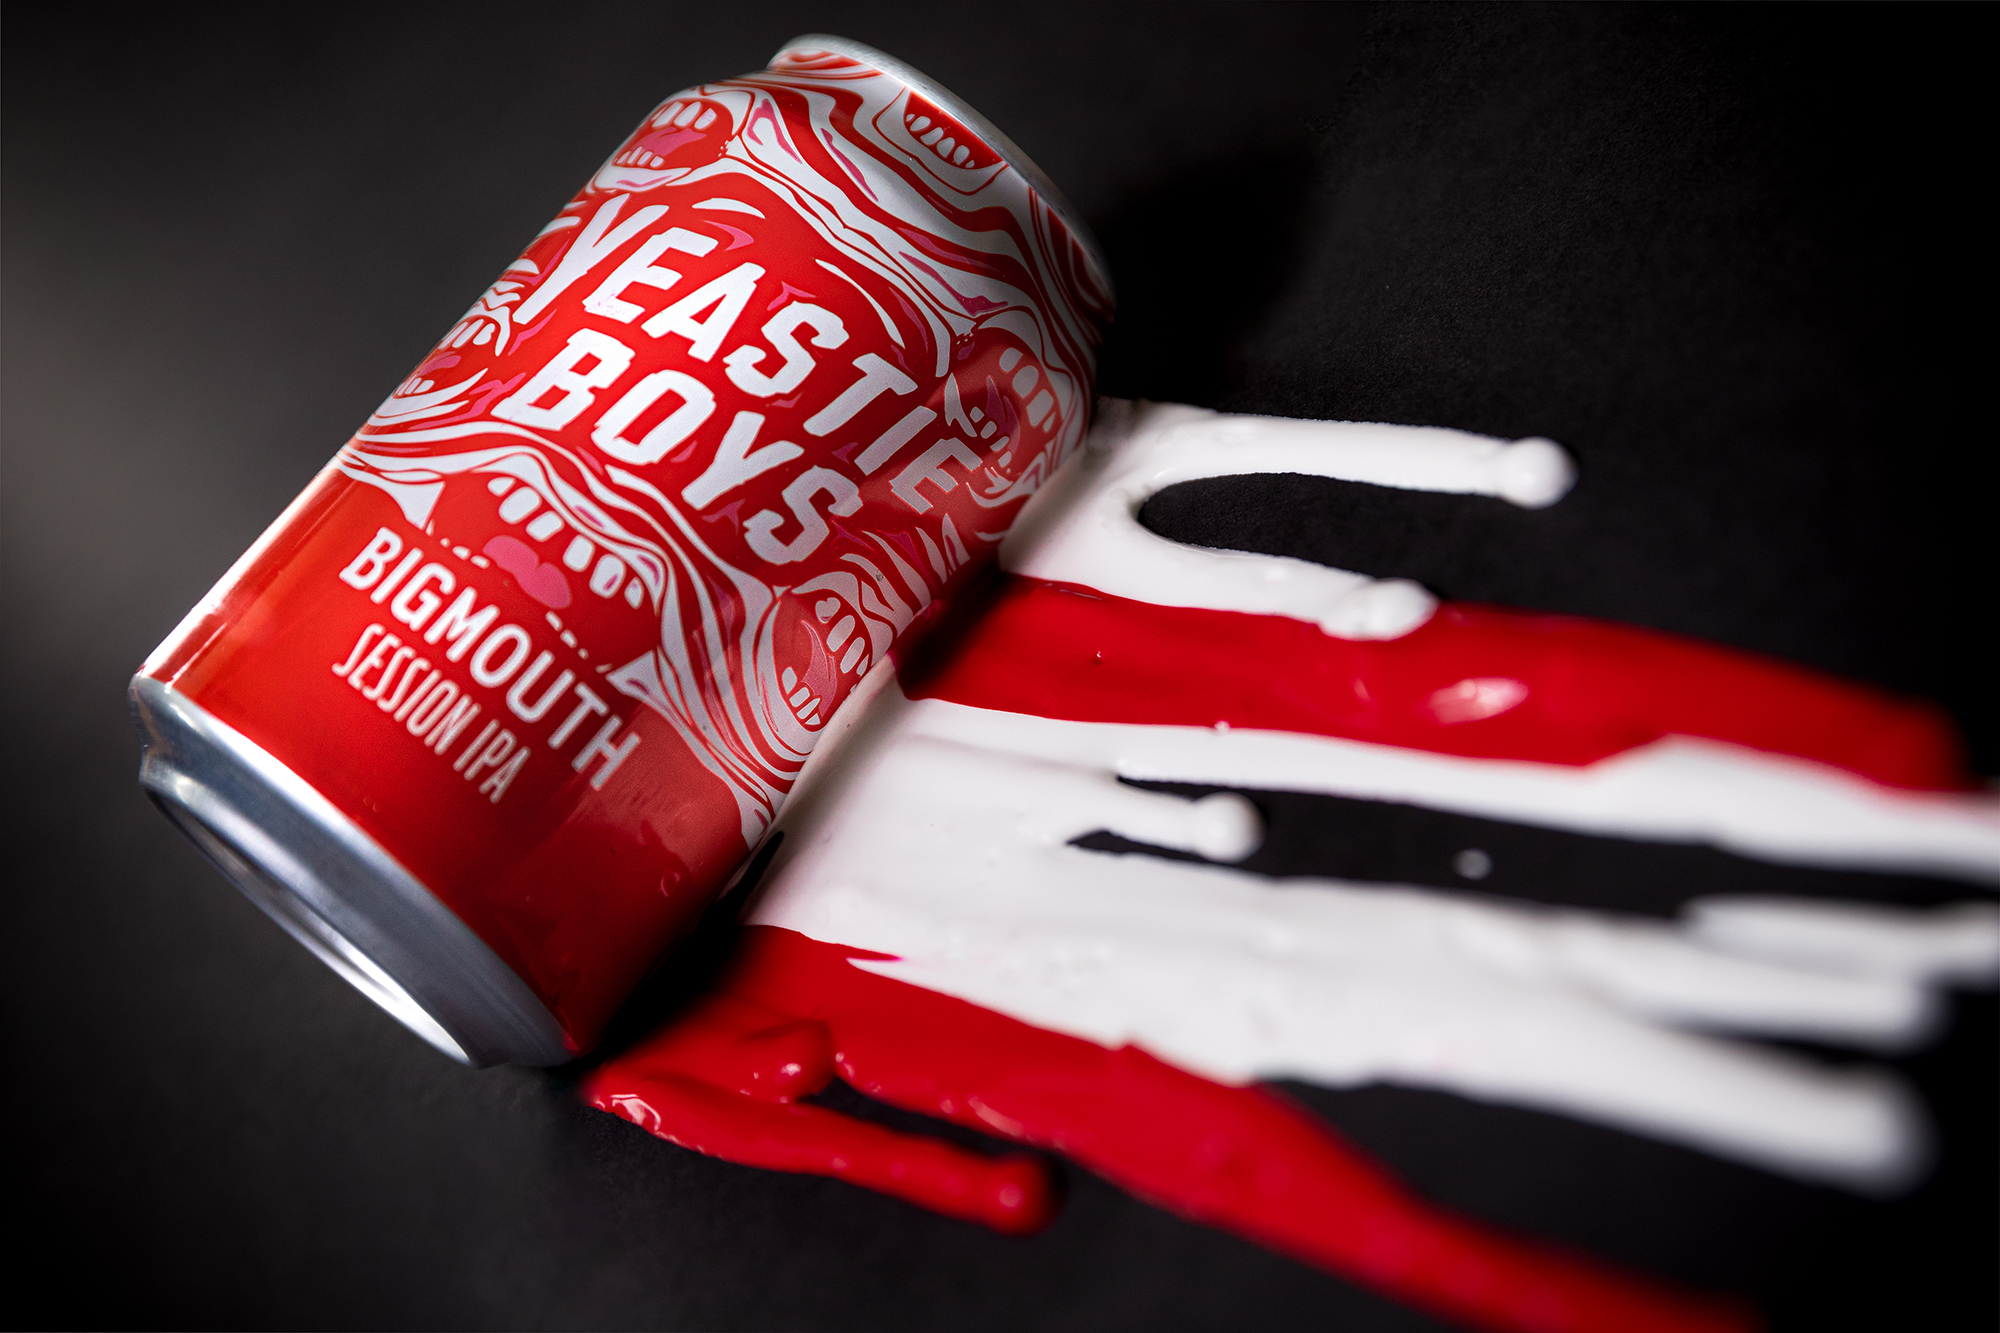 KBE Drinks announces arrival of Yeastie Boys craft beers to its portfolio